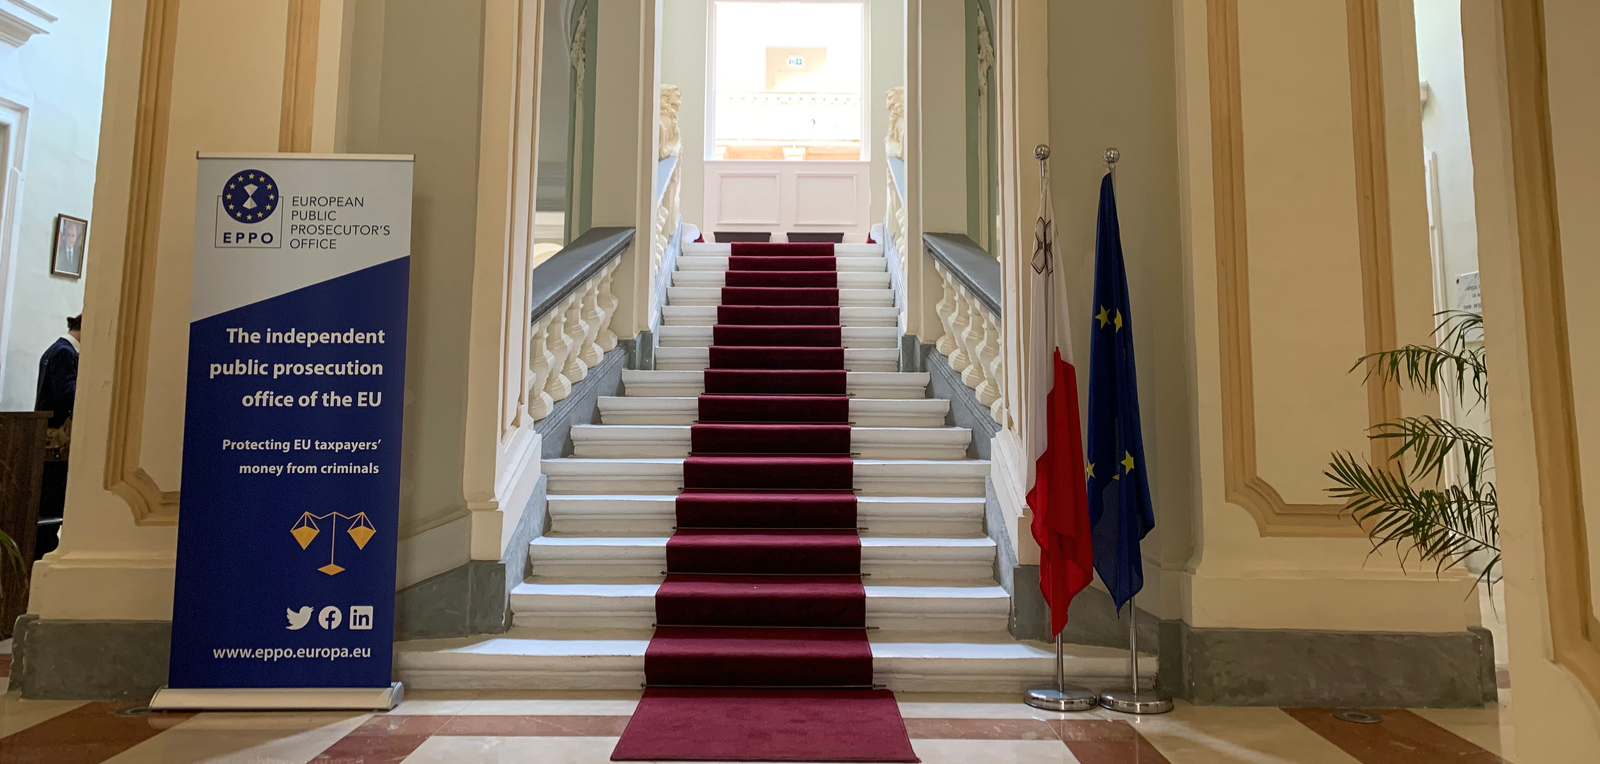 The Office of The Attorney General - European Public Prosecutor's Office